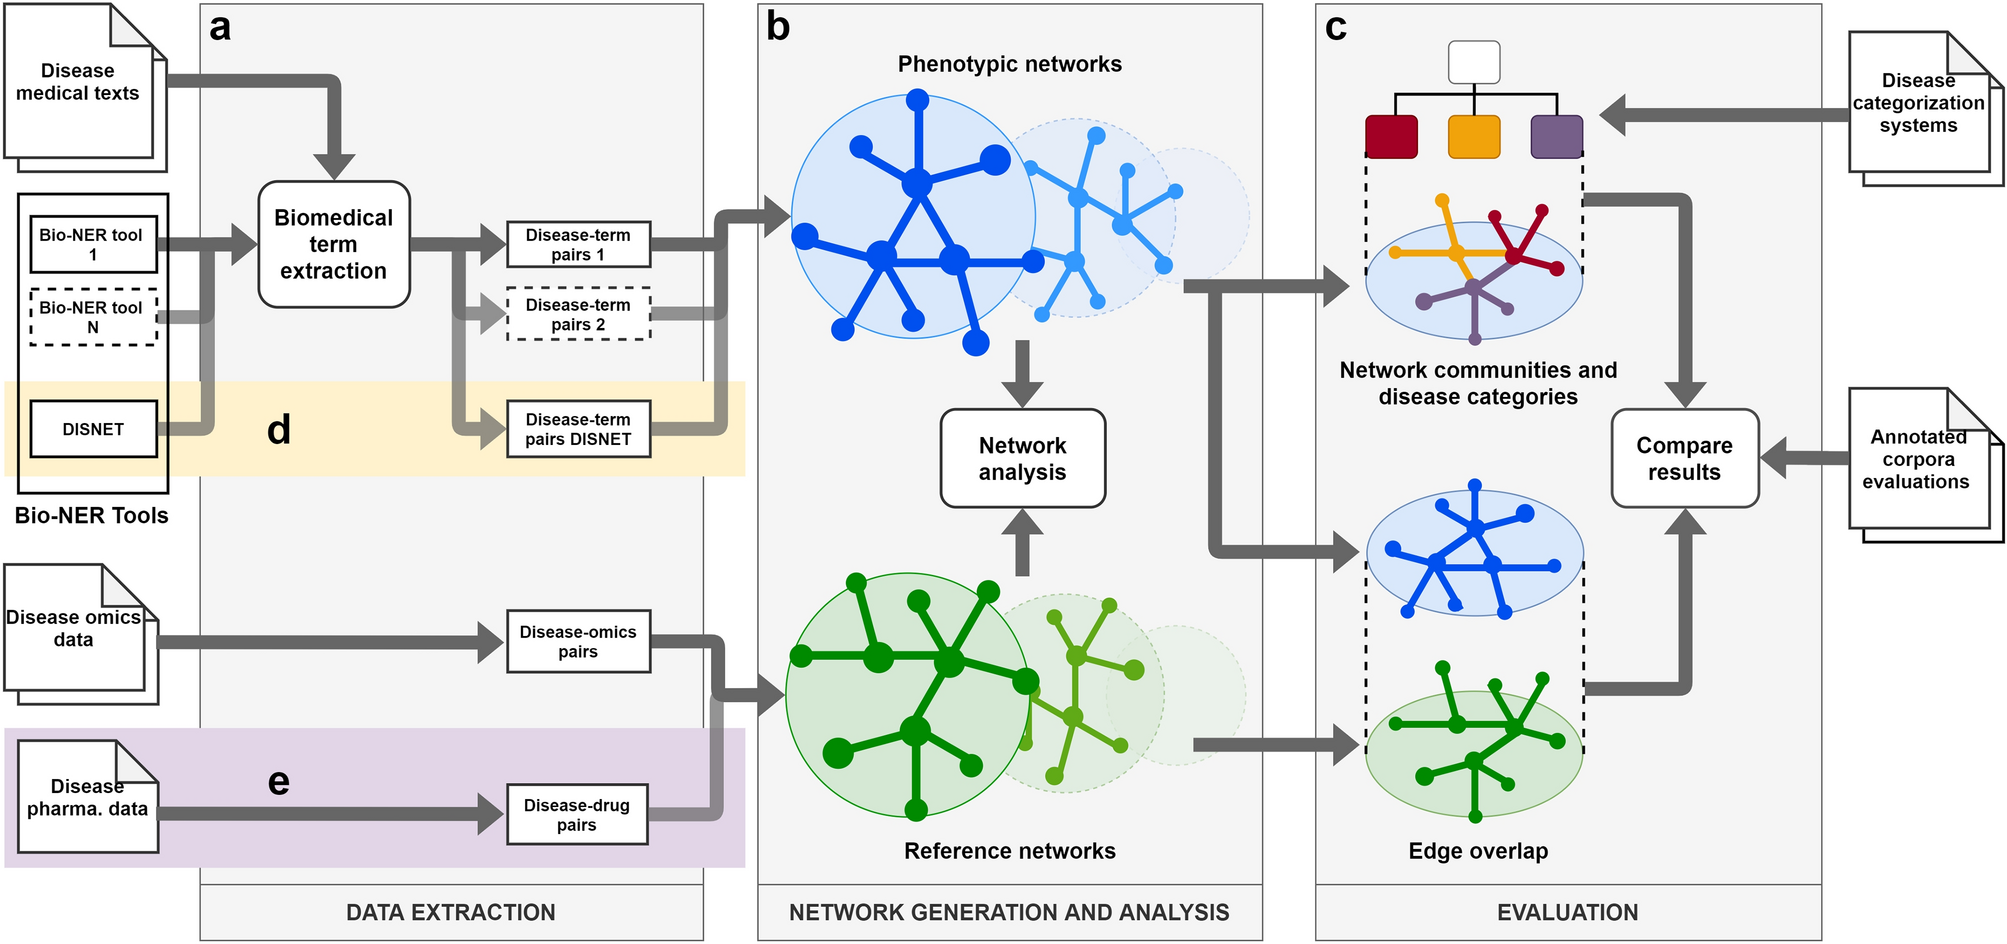 Leveraging network analysis to evaluate biomedical named entity recognition  tools | Scientific Reports